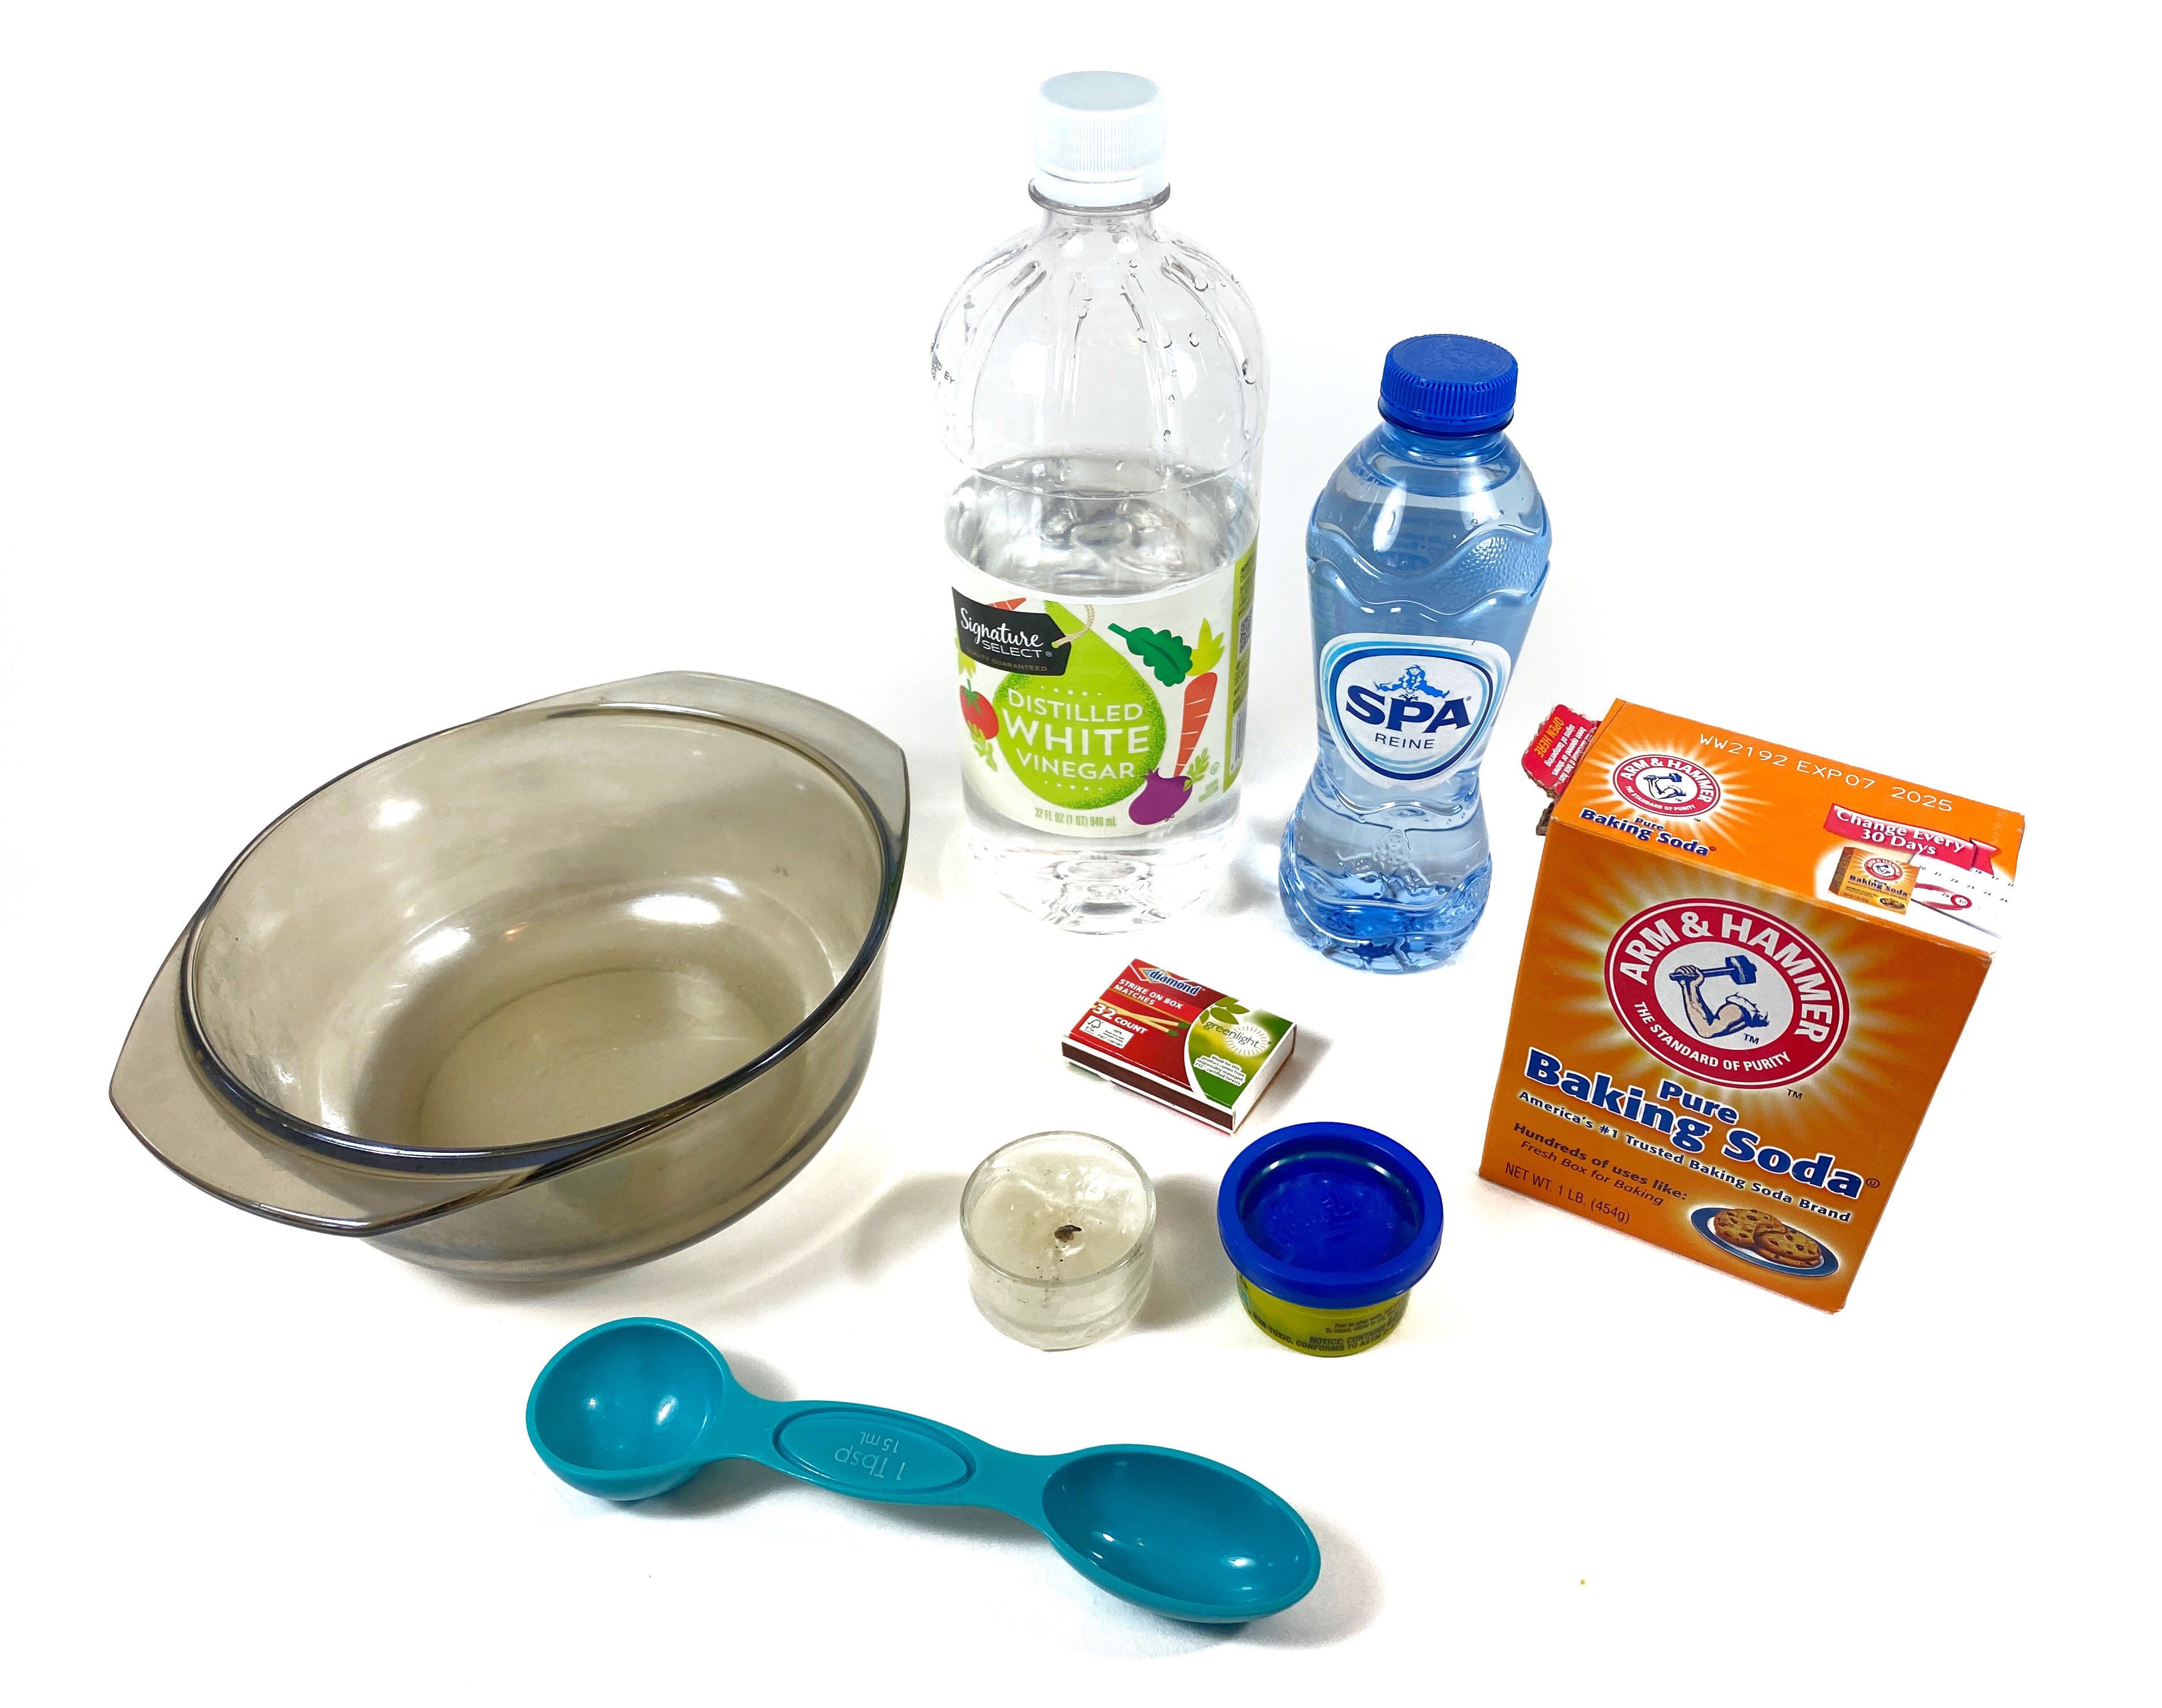 The image shows a glass bowl, a measuring spoon, a candle, some Play-Dough, a matchbox, a baking soda container, a bottle of water, and a bottle of white vinegar.